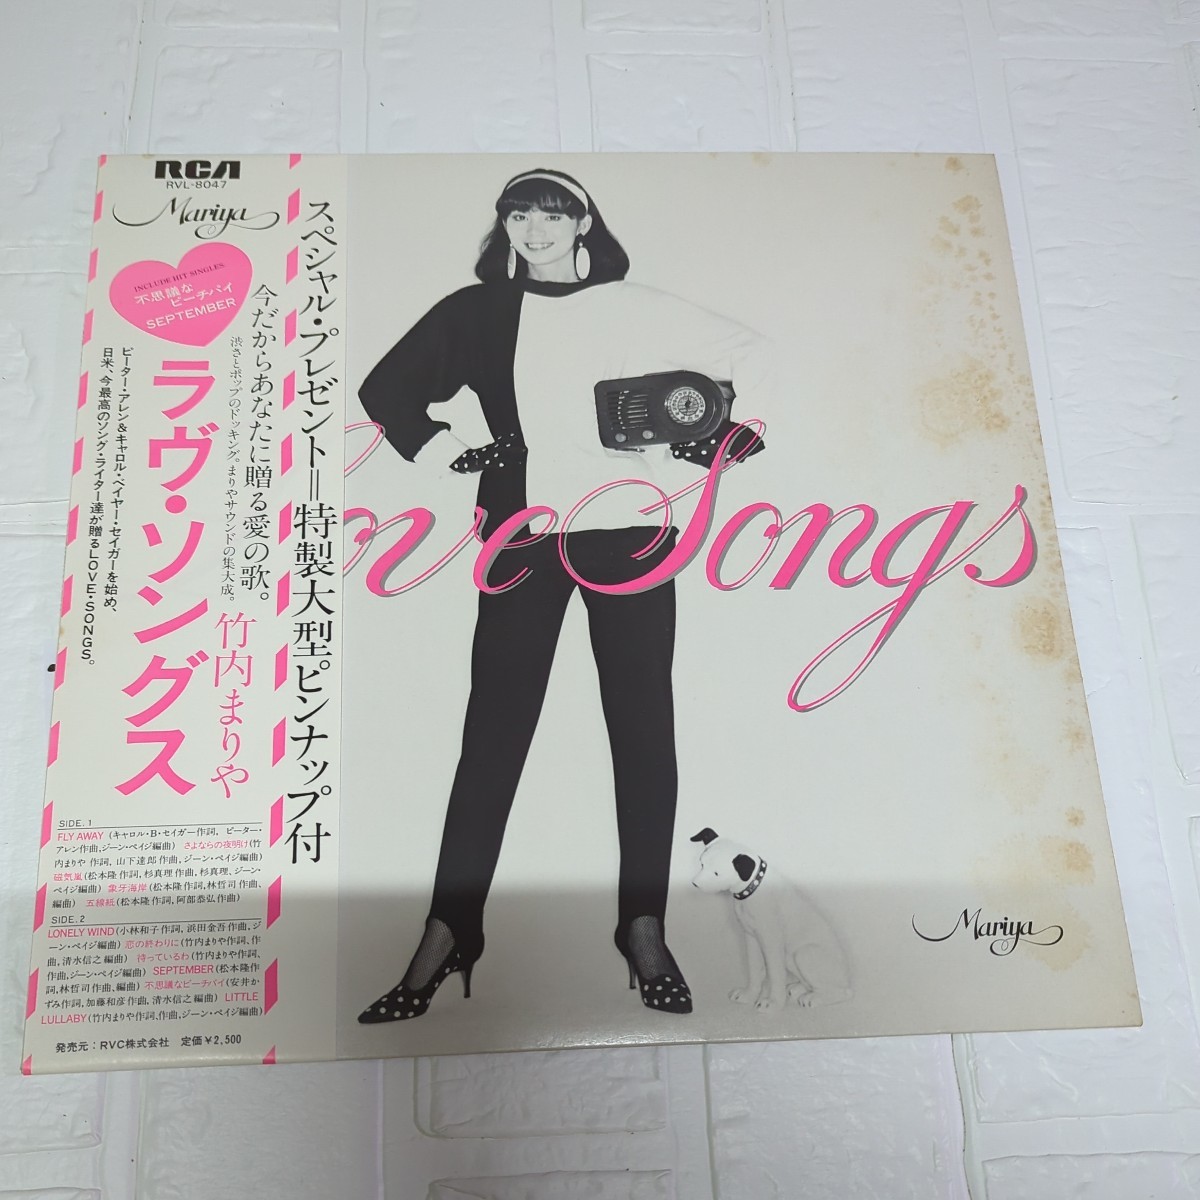  Takeuchi Mariya LOVE SONGS record with belt lyric card attaching jacket . color fading dirt equipped.